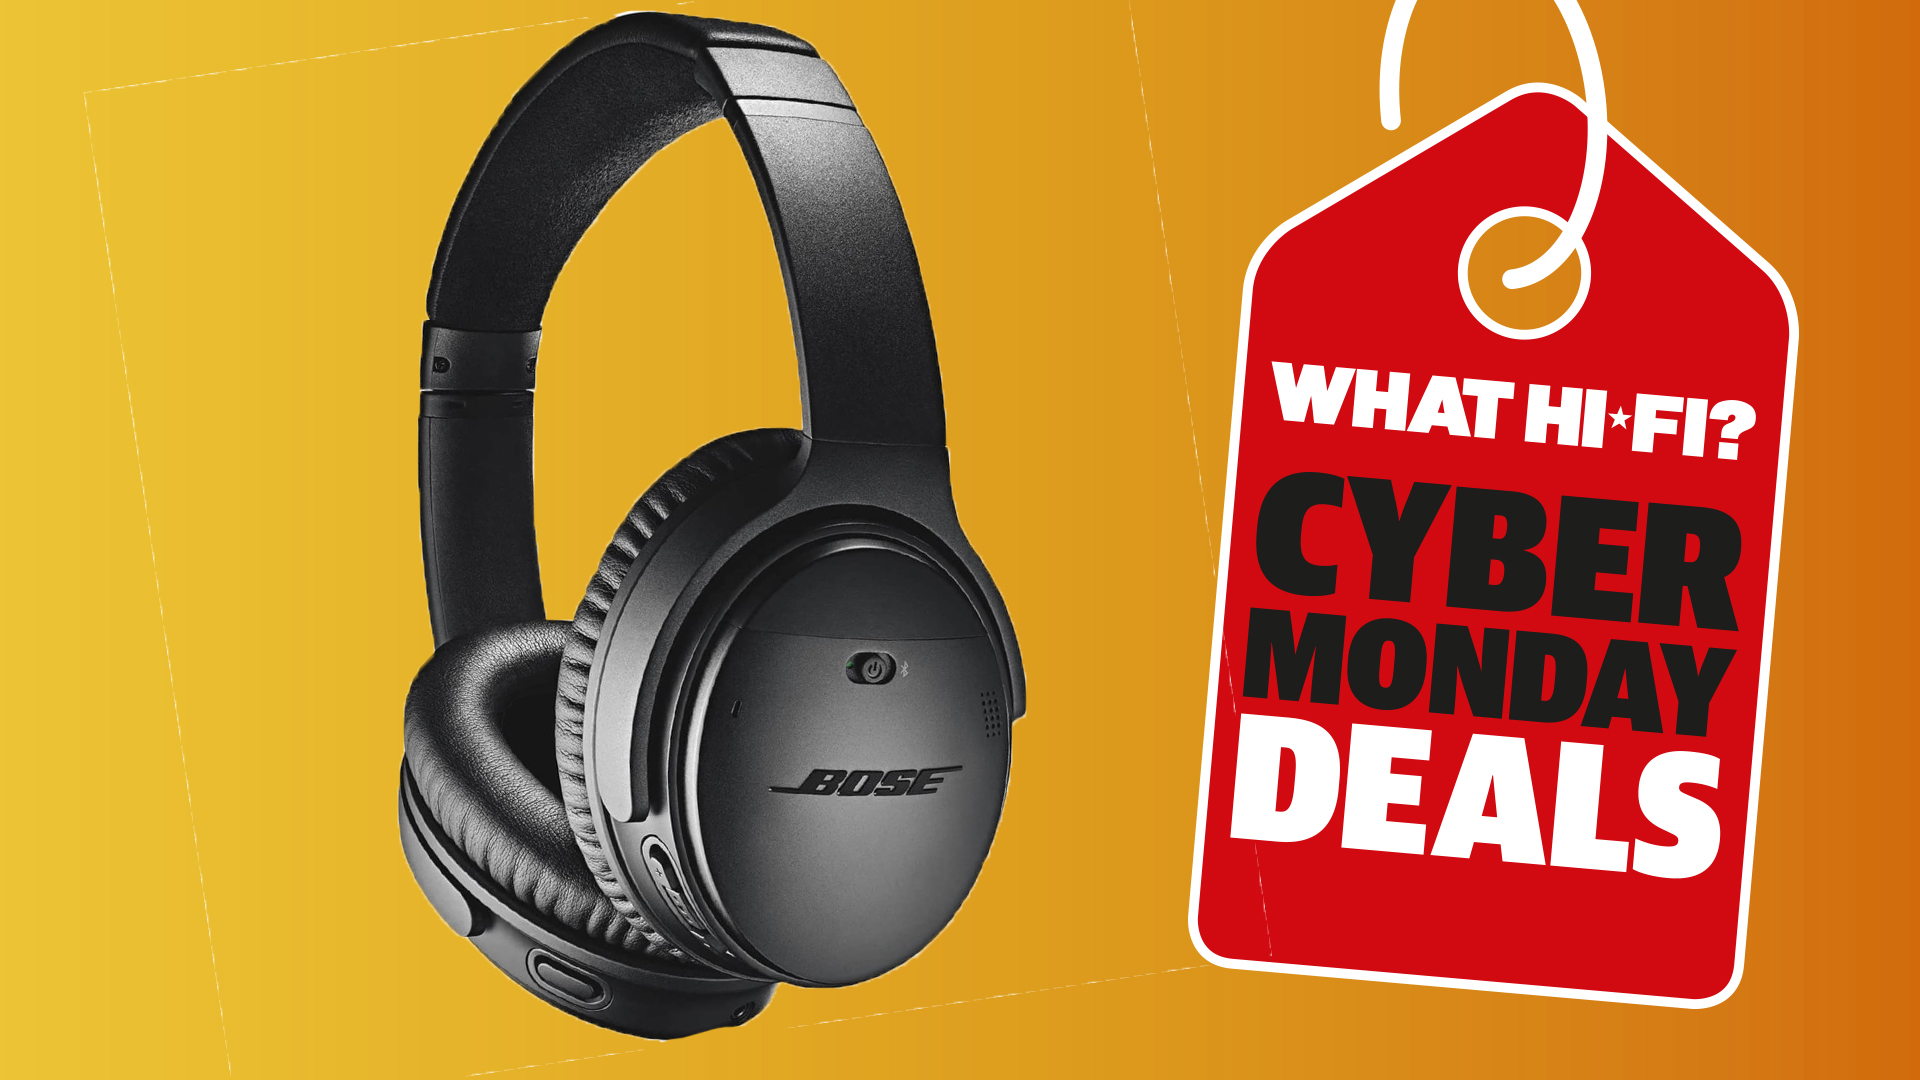 Bose QC 35 II price slashed AGAIN in the Cyber Monday headphones deals |  What Hi-Fi?